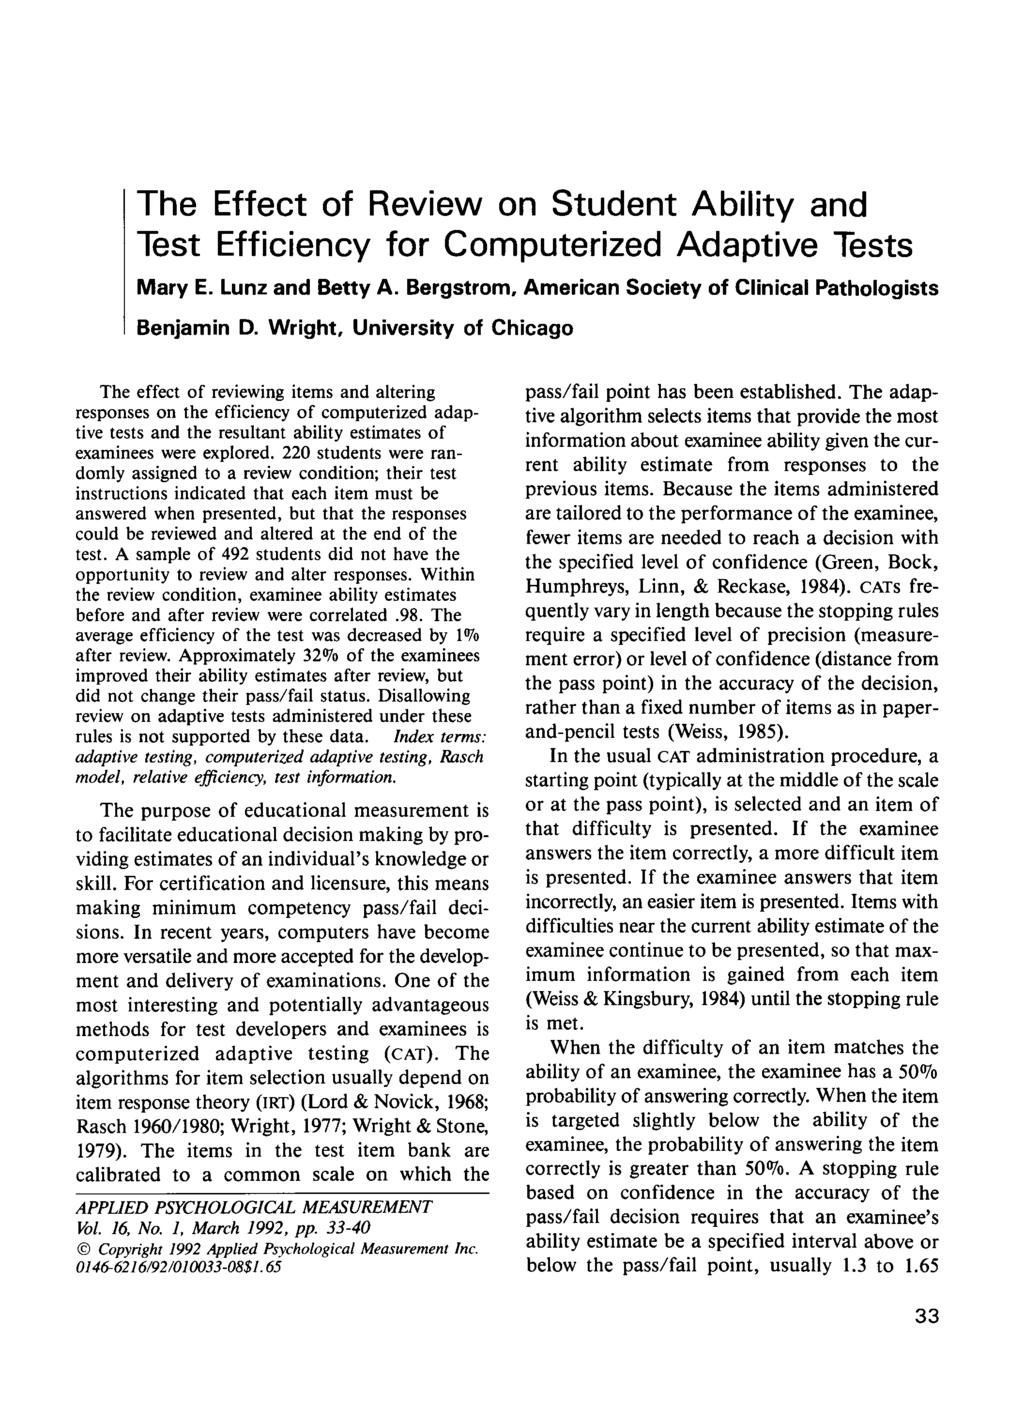 The Effect of Review on Student Ability and Test Efficiency for Computerized Adaptive Tests Mary E. Lunz and Betty A. Bergstrom, American Society of Clinical Pathologists Benjamin D.